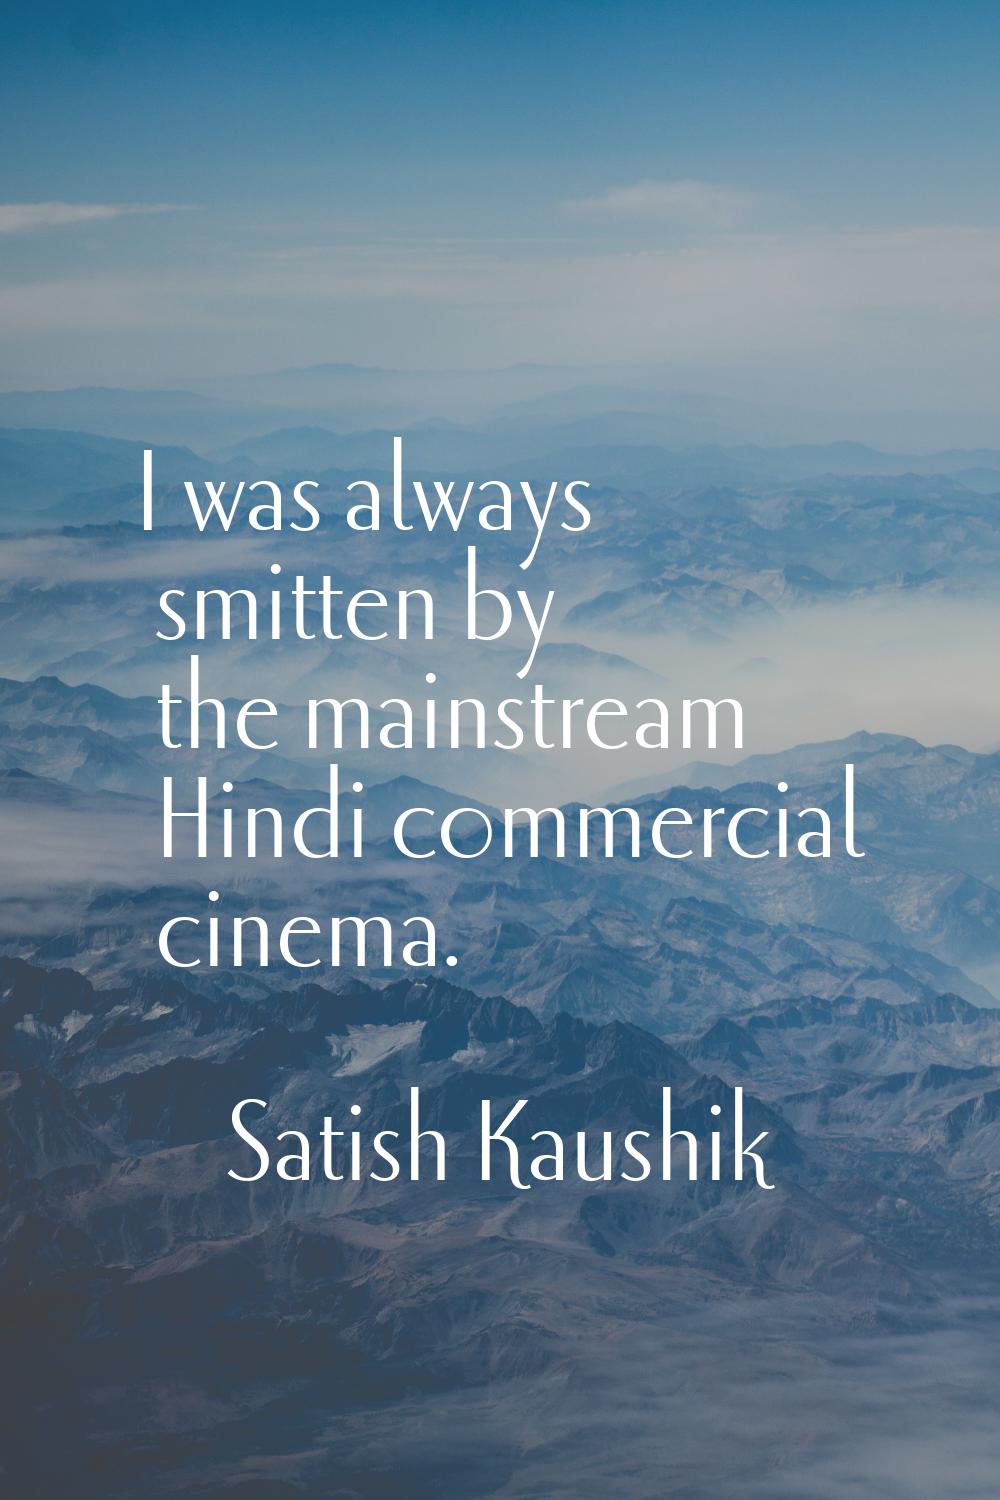 I was always smitten by the mainstream Hindi commercial cinema.